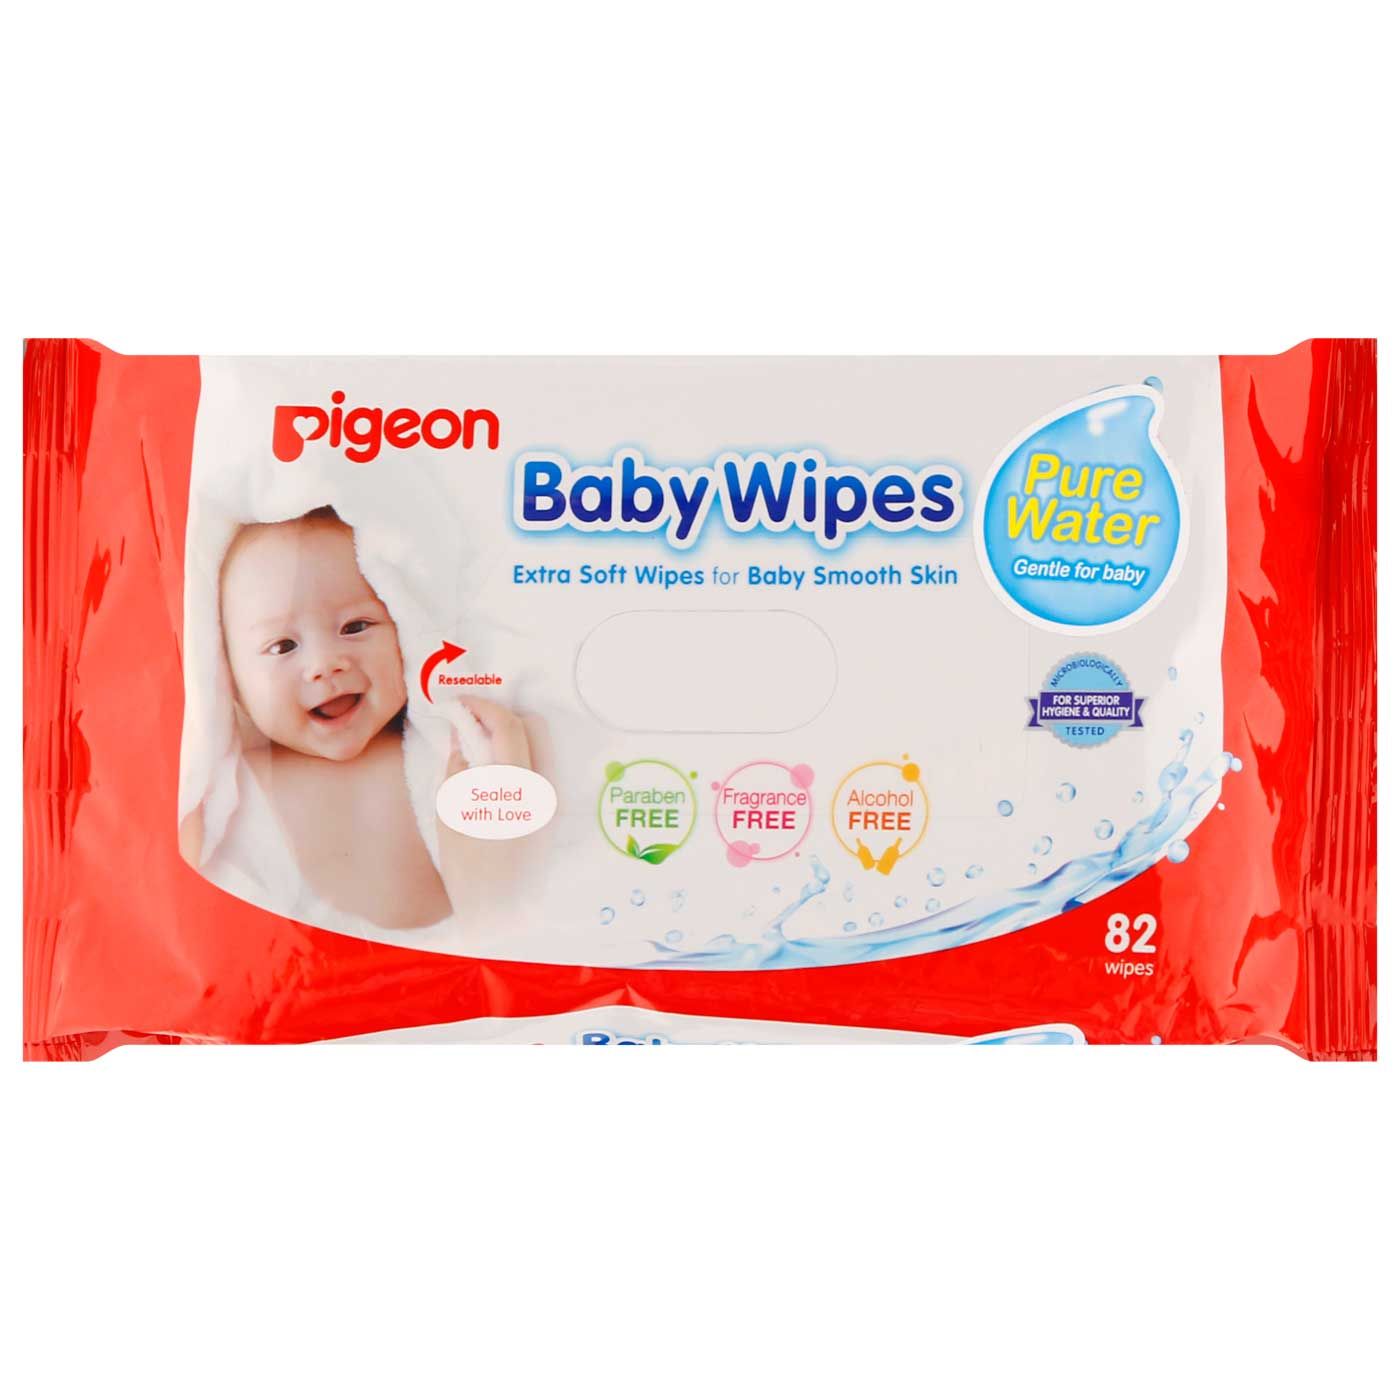 Pigeon Baby Wipes Pure Water 82's - 1